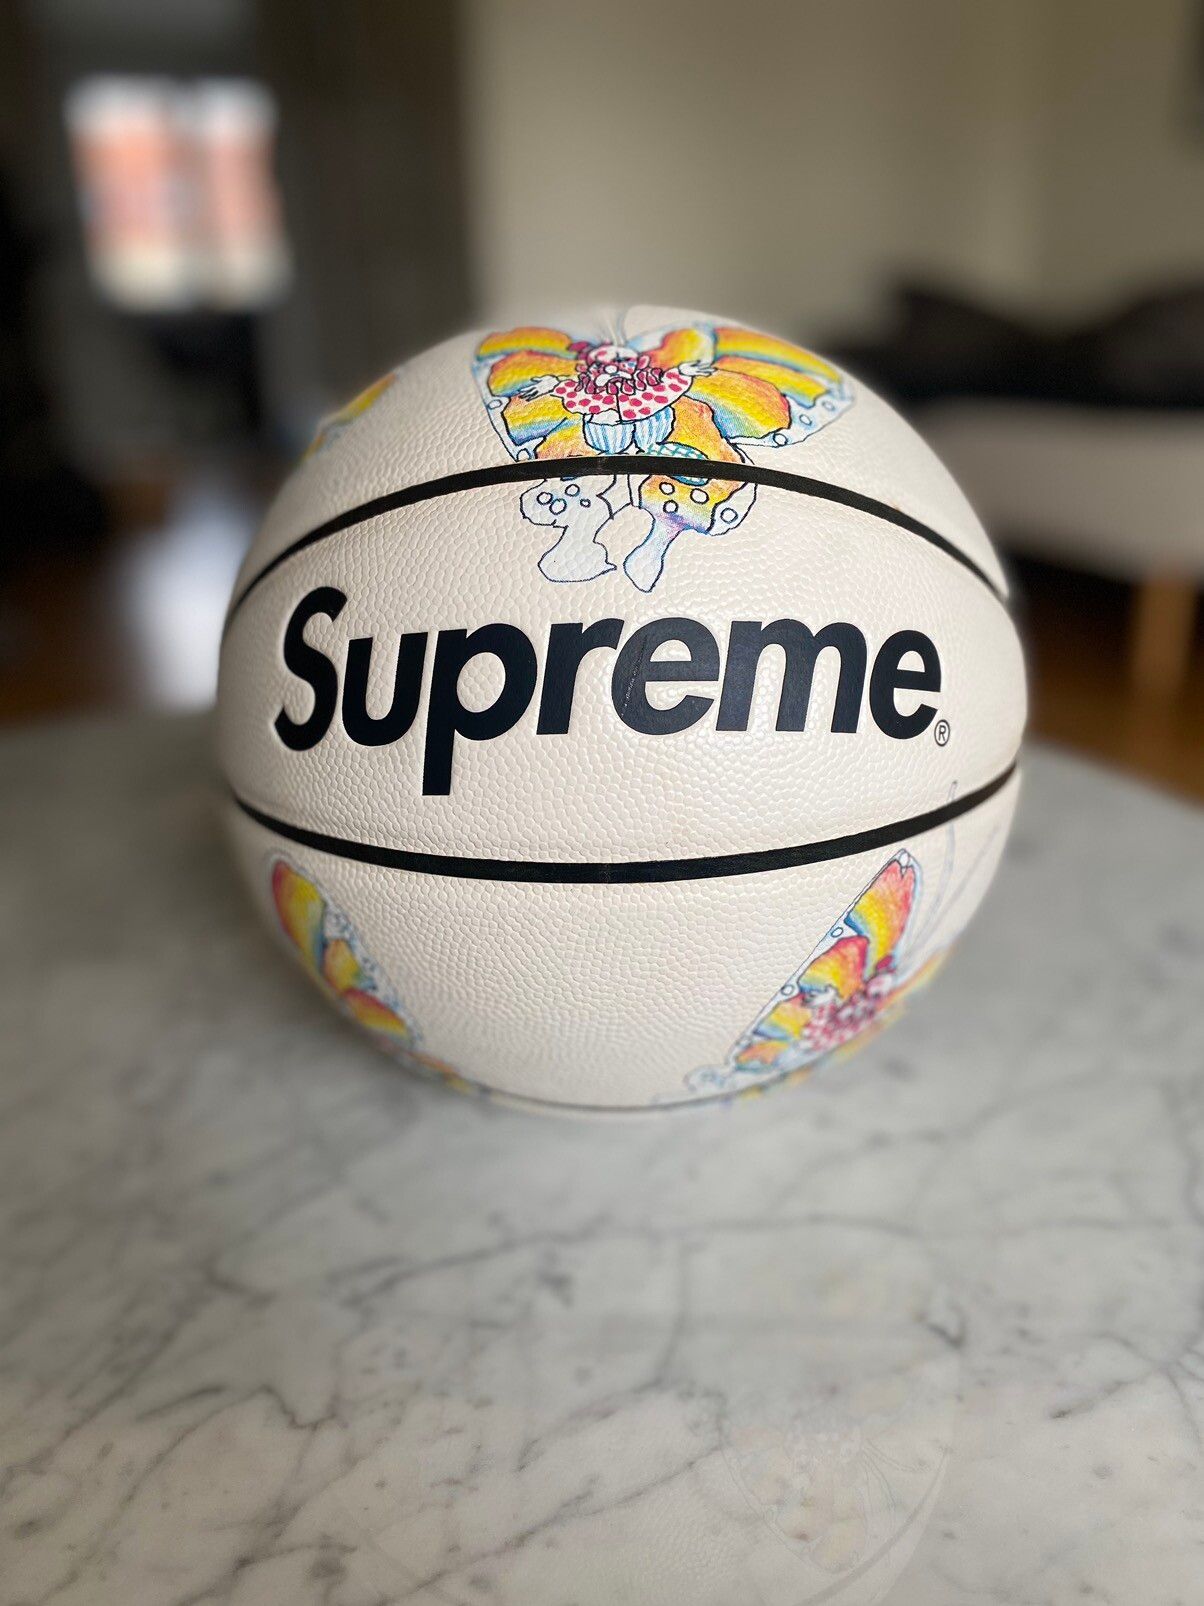 Supreme Gonz Butterfly Basketball | Grailed